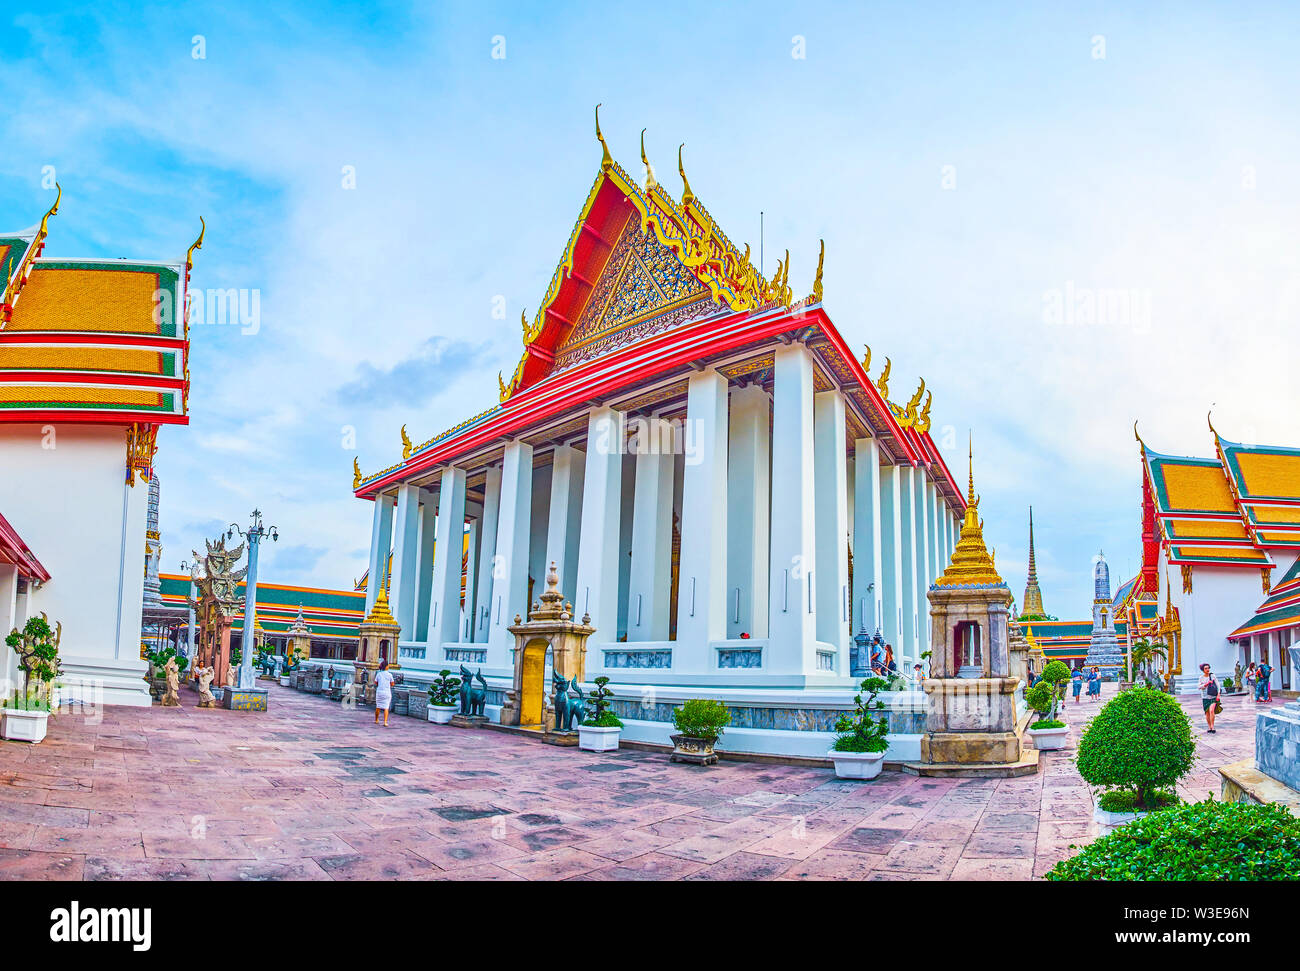 BANGKOK, THAILAND - APRIL 22, 2019: The panoramic  view on the facade part of Phra Ubosot shrine, the main temple in Wat Pho complex, also called the Stock Photo